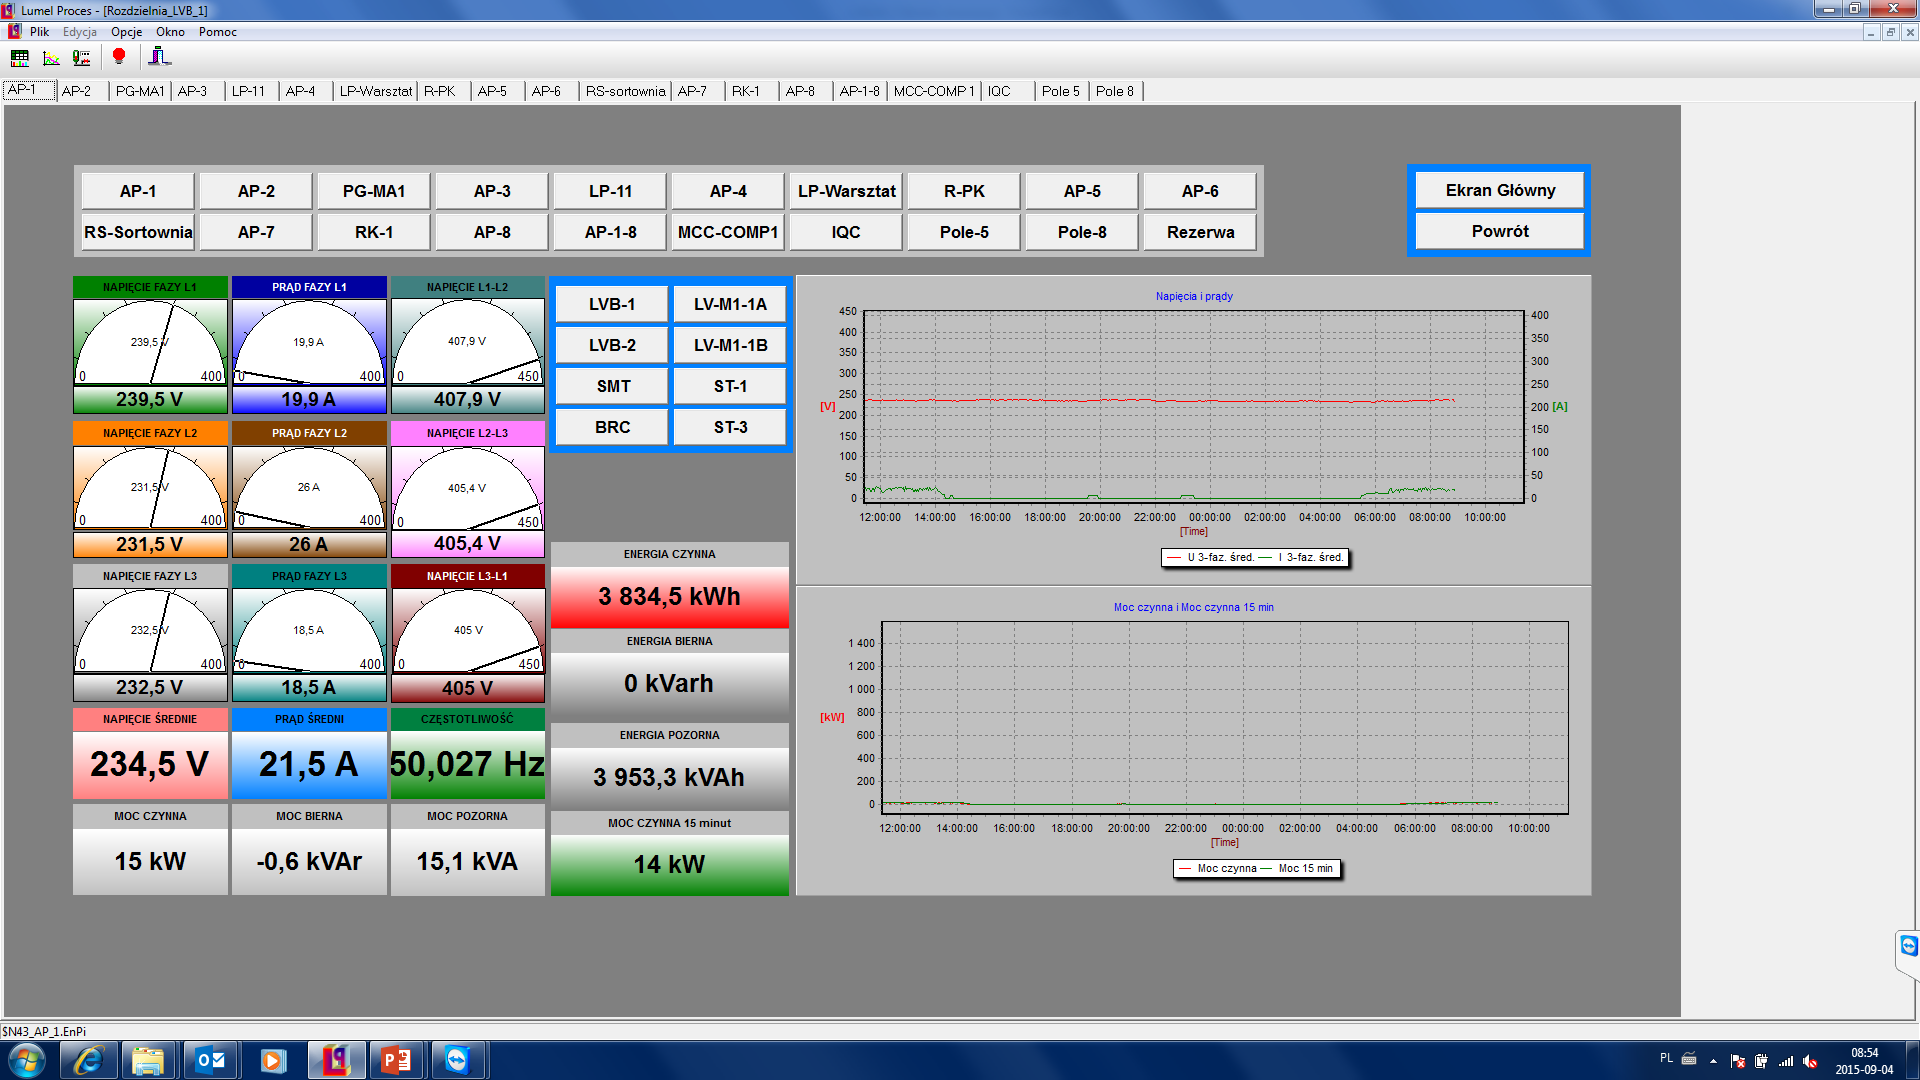 Utilities Monitoring System - energy, water, gas, compressed air